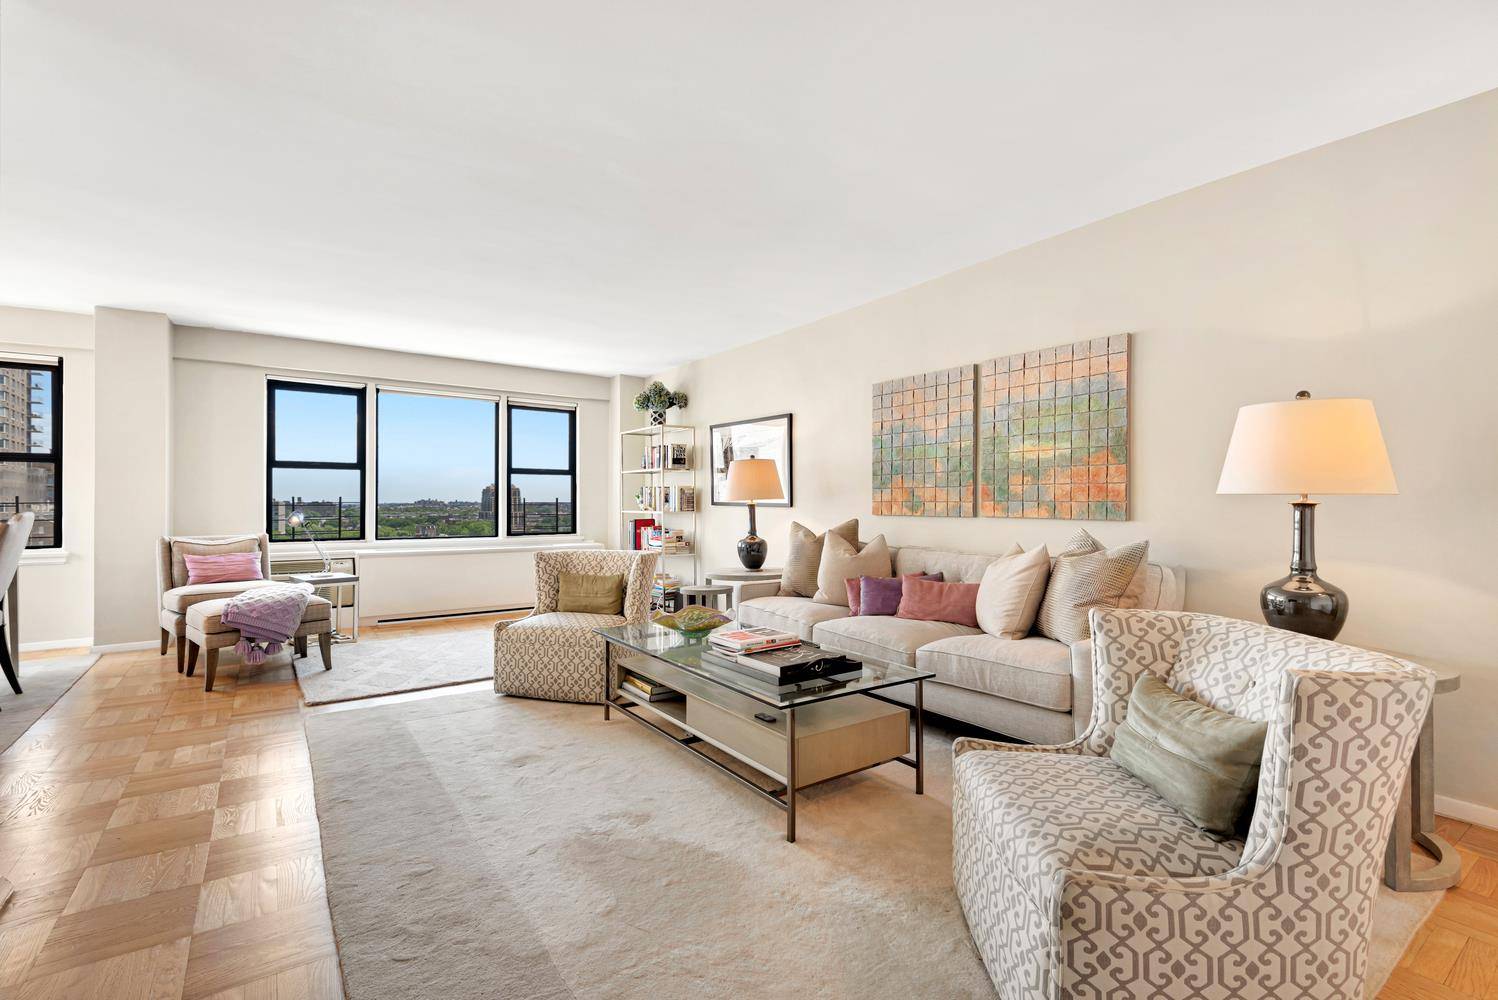 Welcome home to this large, corner 2 bedroom apartment with views of the East River.